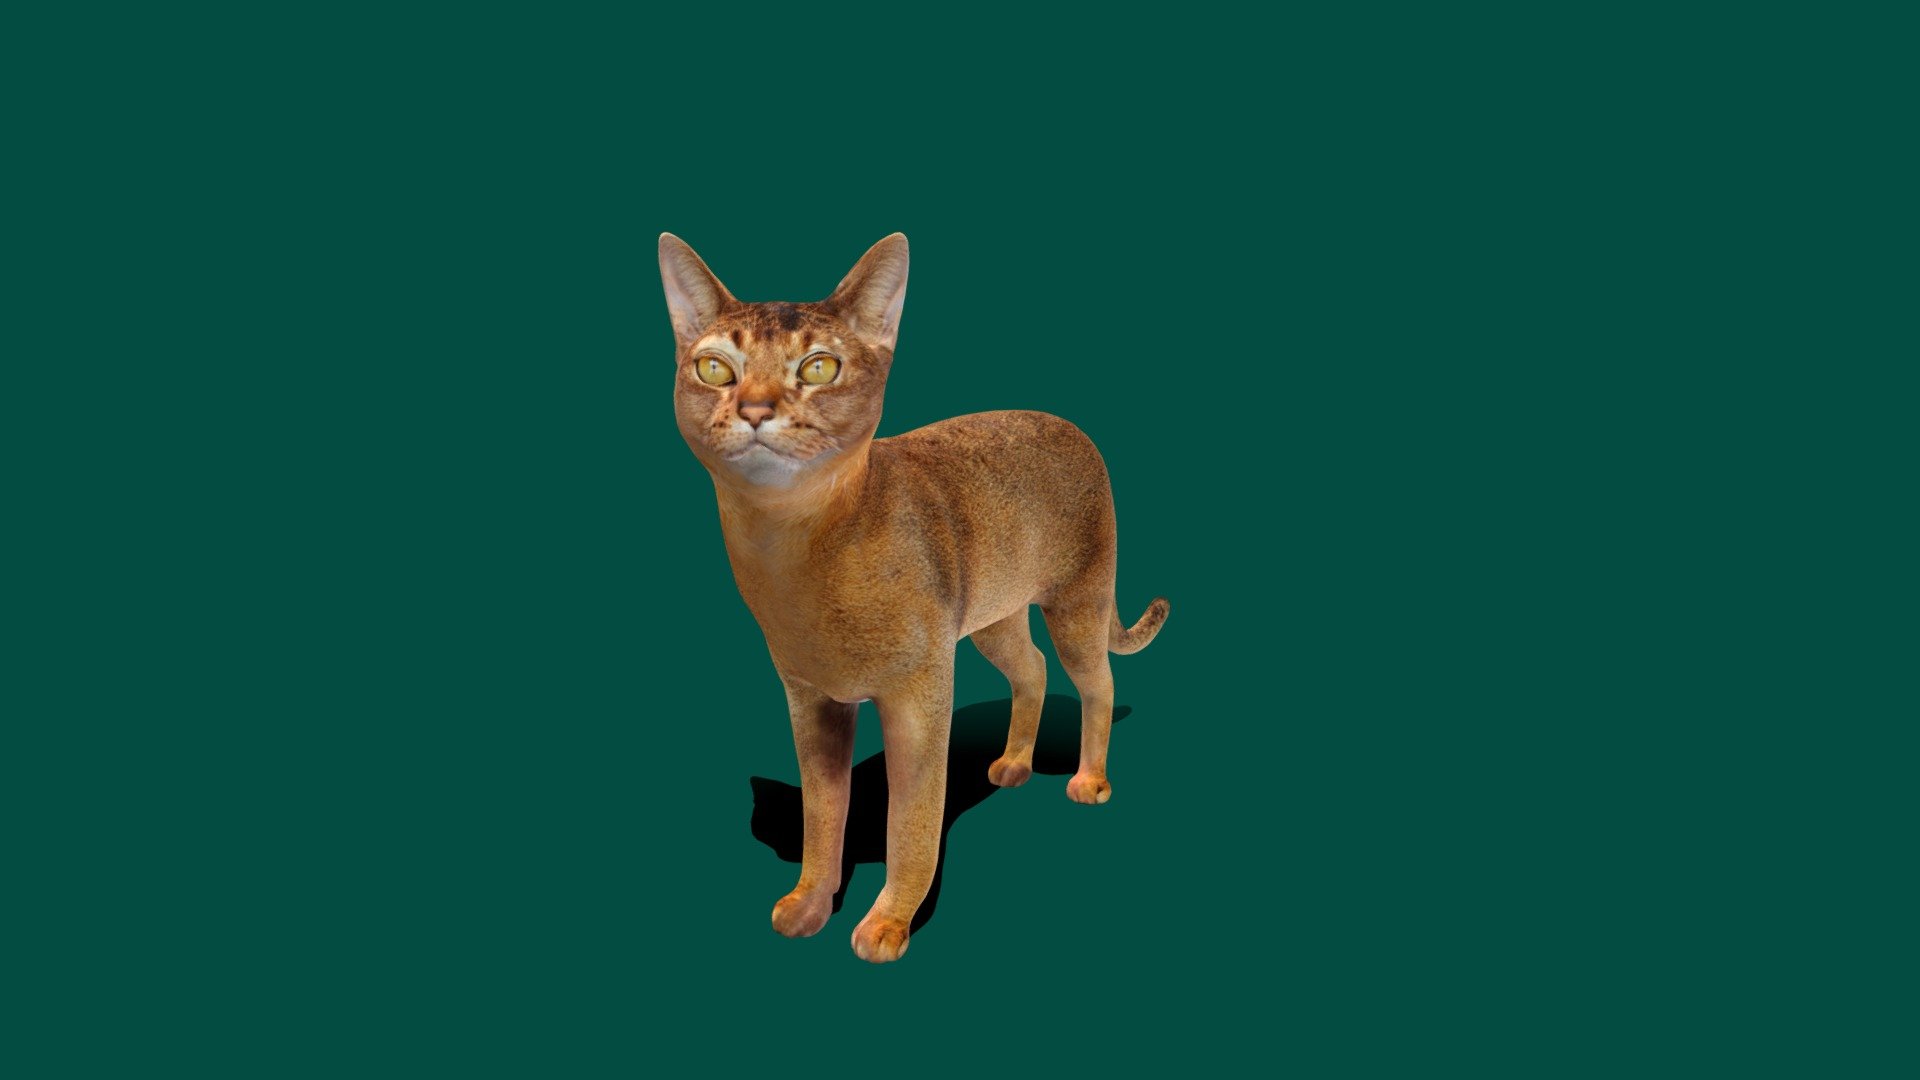 **Felis_catus 
4K PBR Textures Material 
Idle Animations **


The Abyssinian is a breed of domestic short-haired_cat with a distinctive &ldquo;ticked